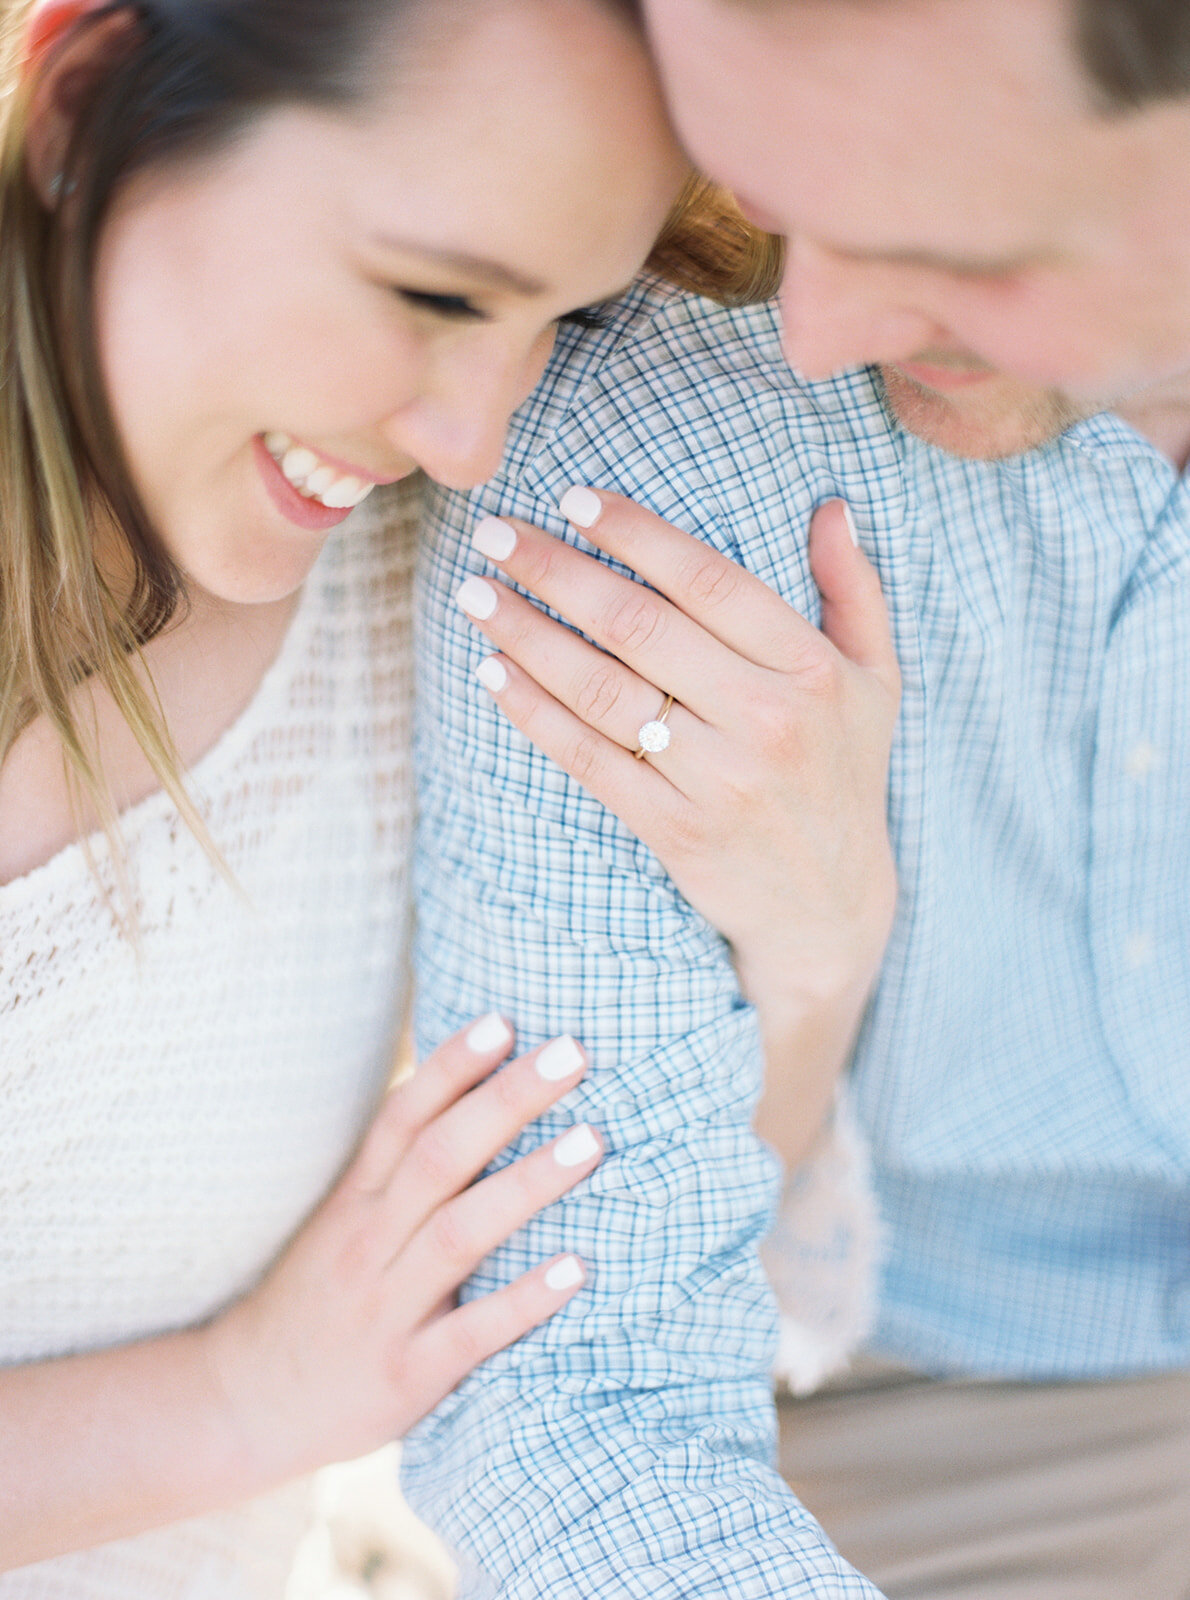 outdoor engagement photography 3